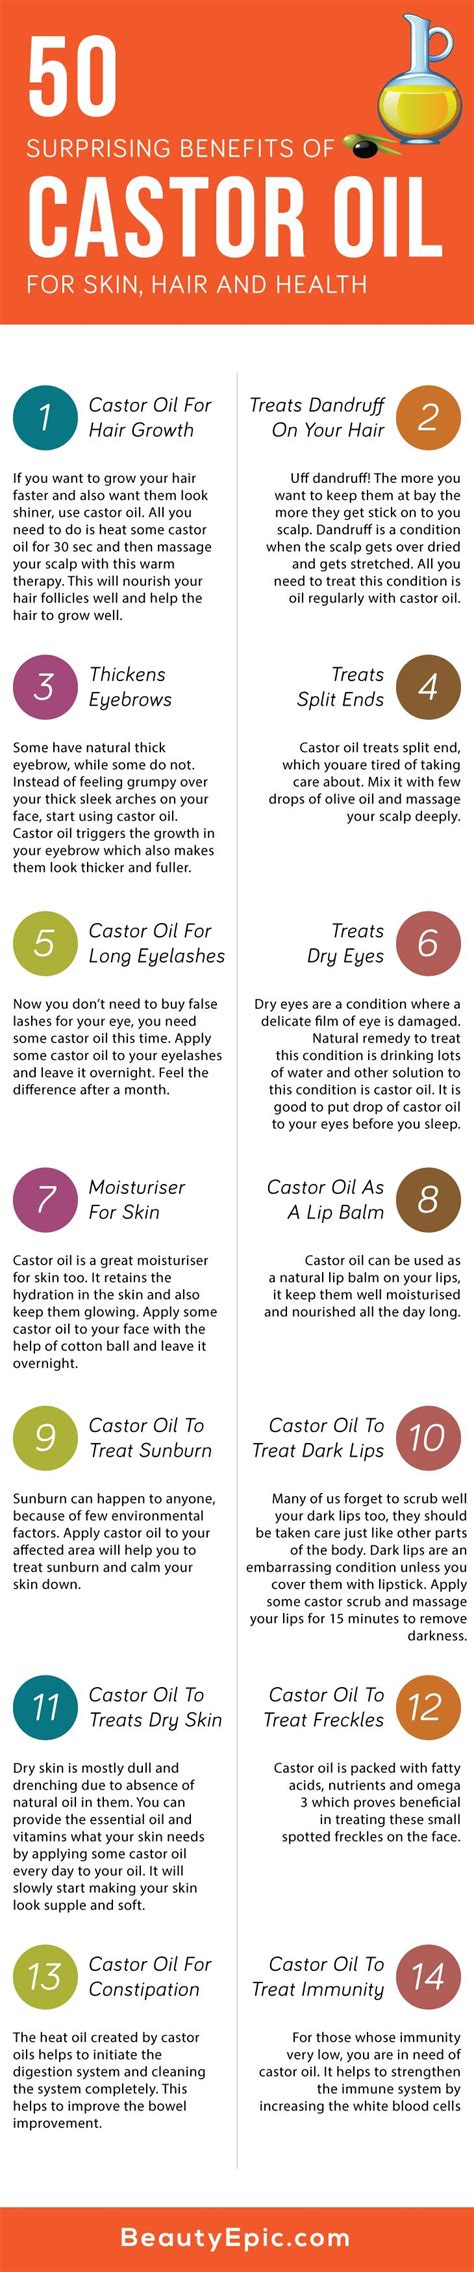 50 Surprising Uses And Benefits Of Castor Oil For Skin Hair And Health